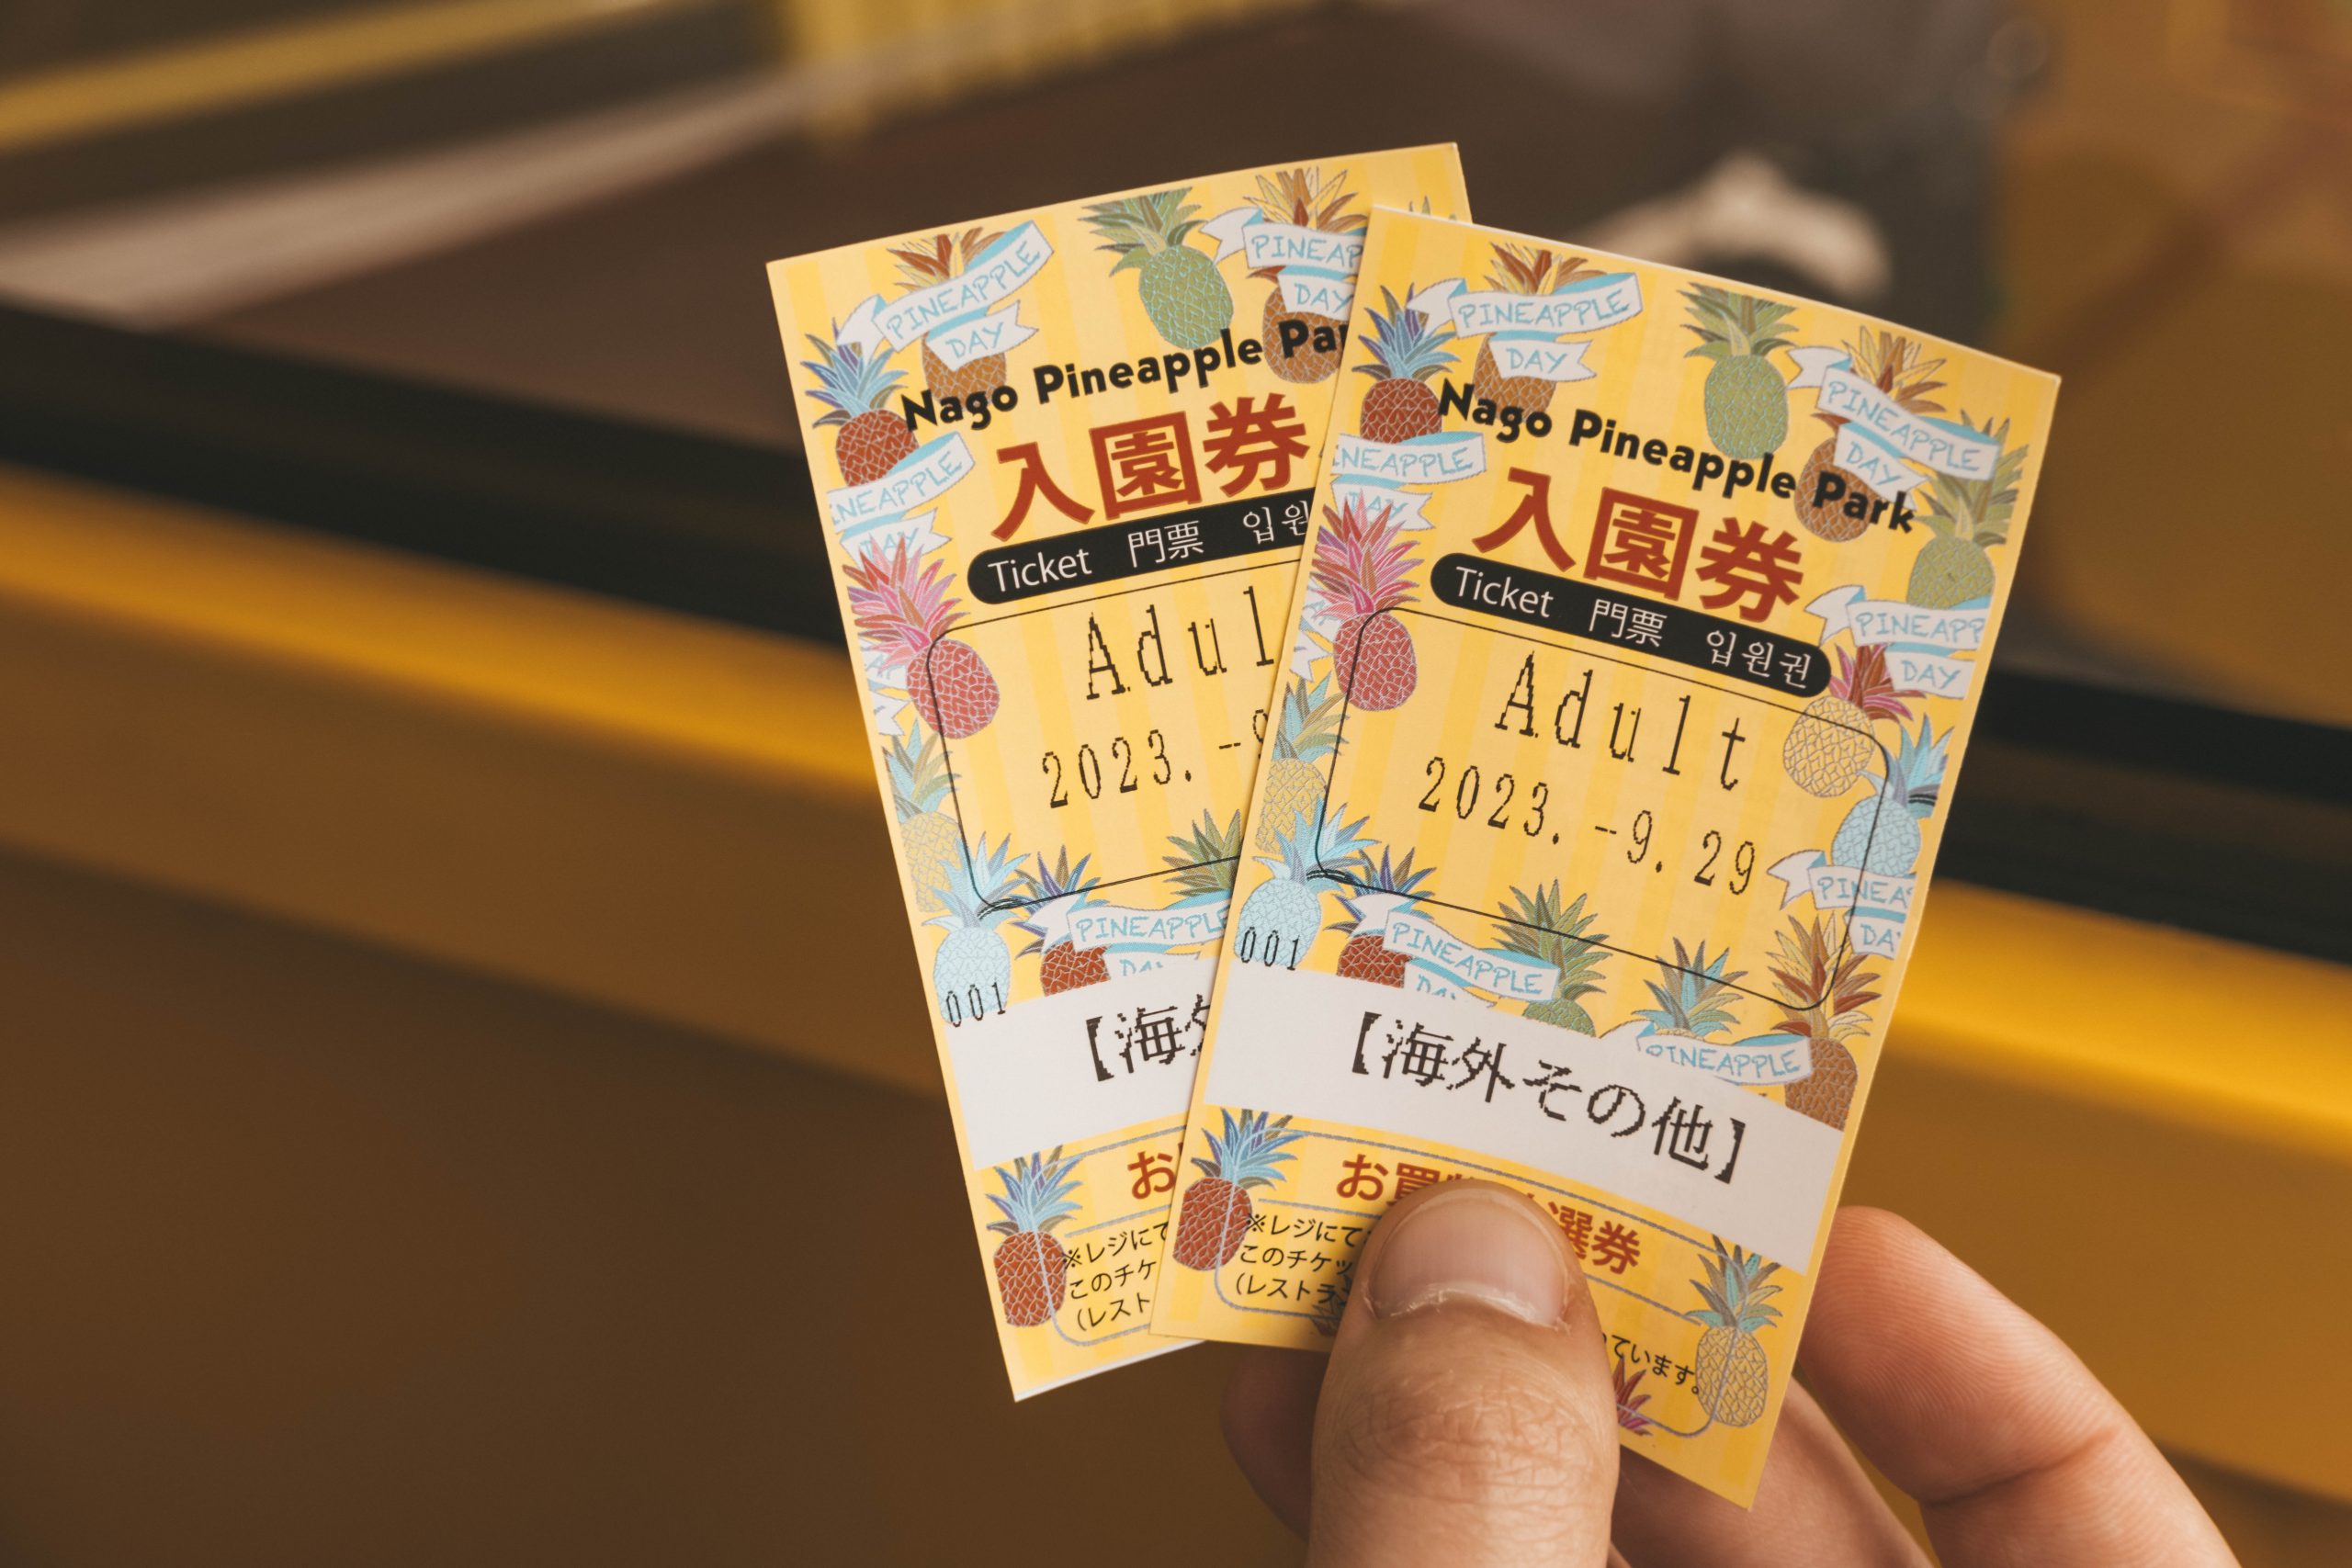 Nago pineapple park tickets